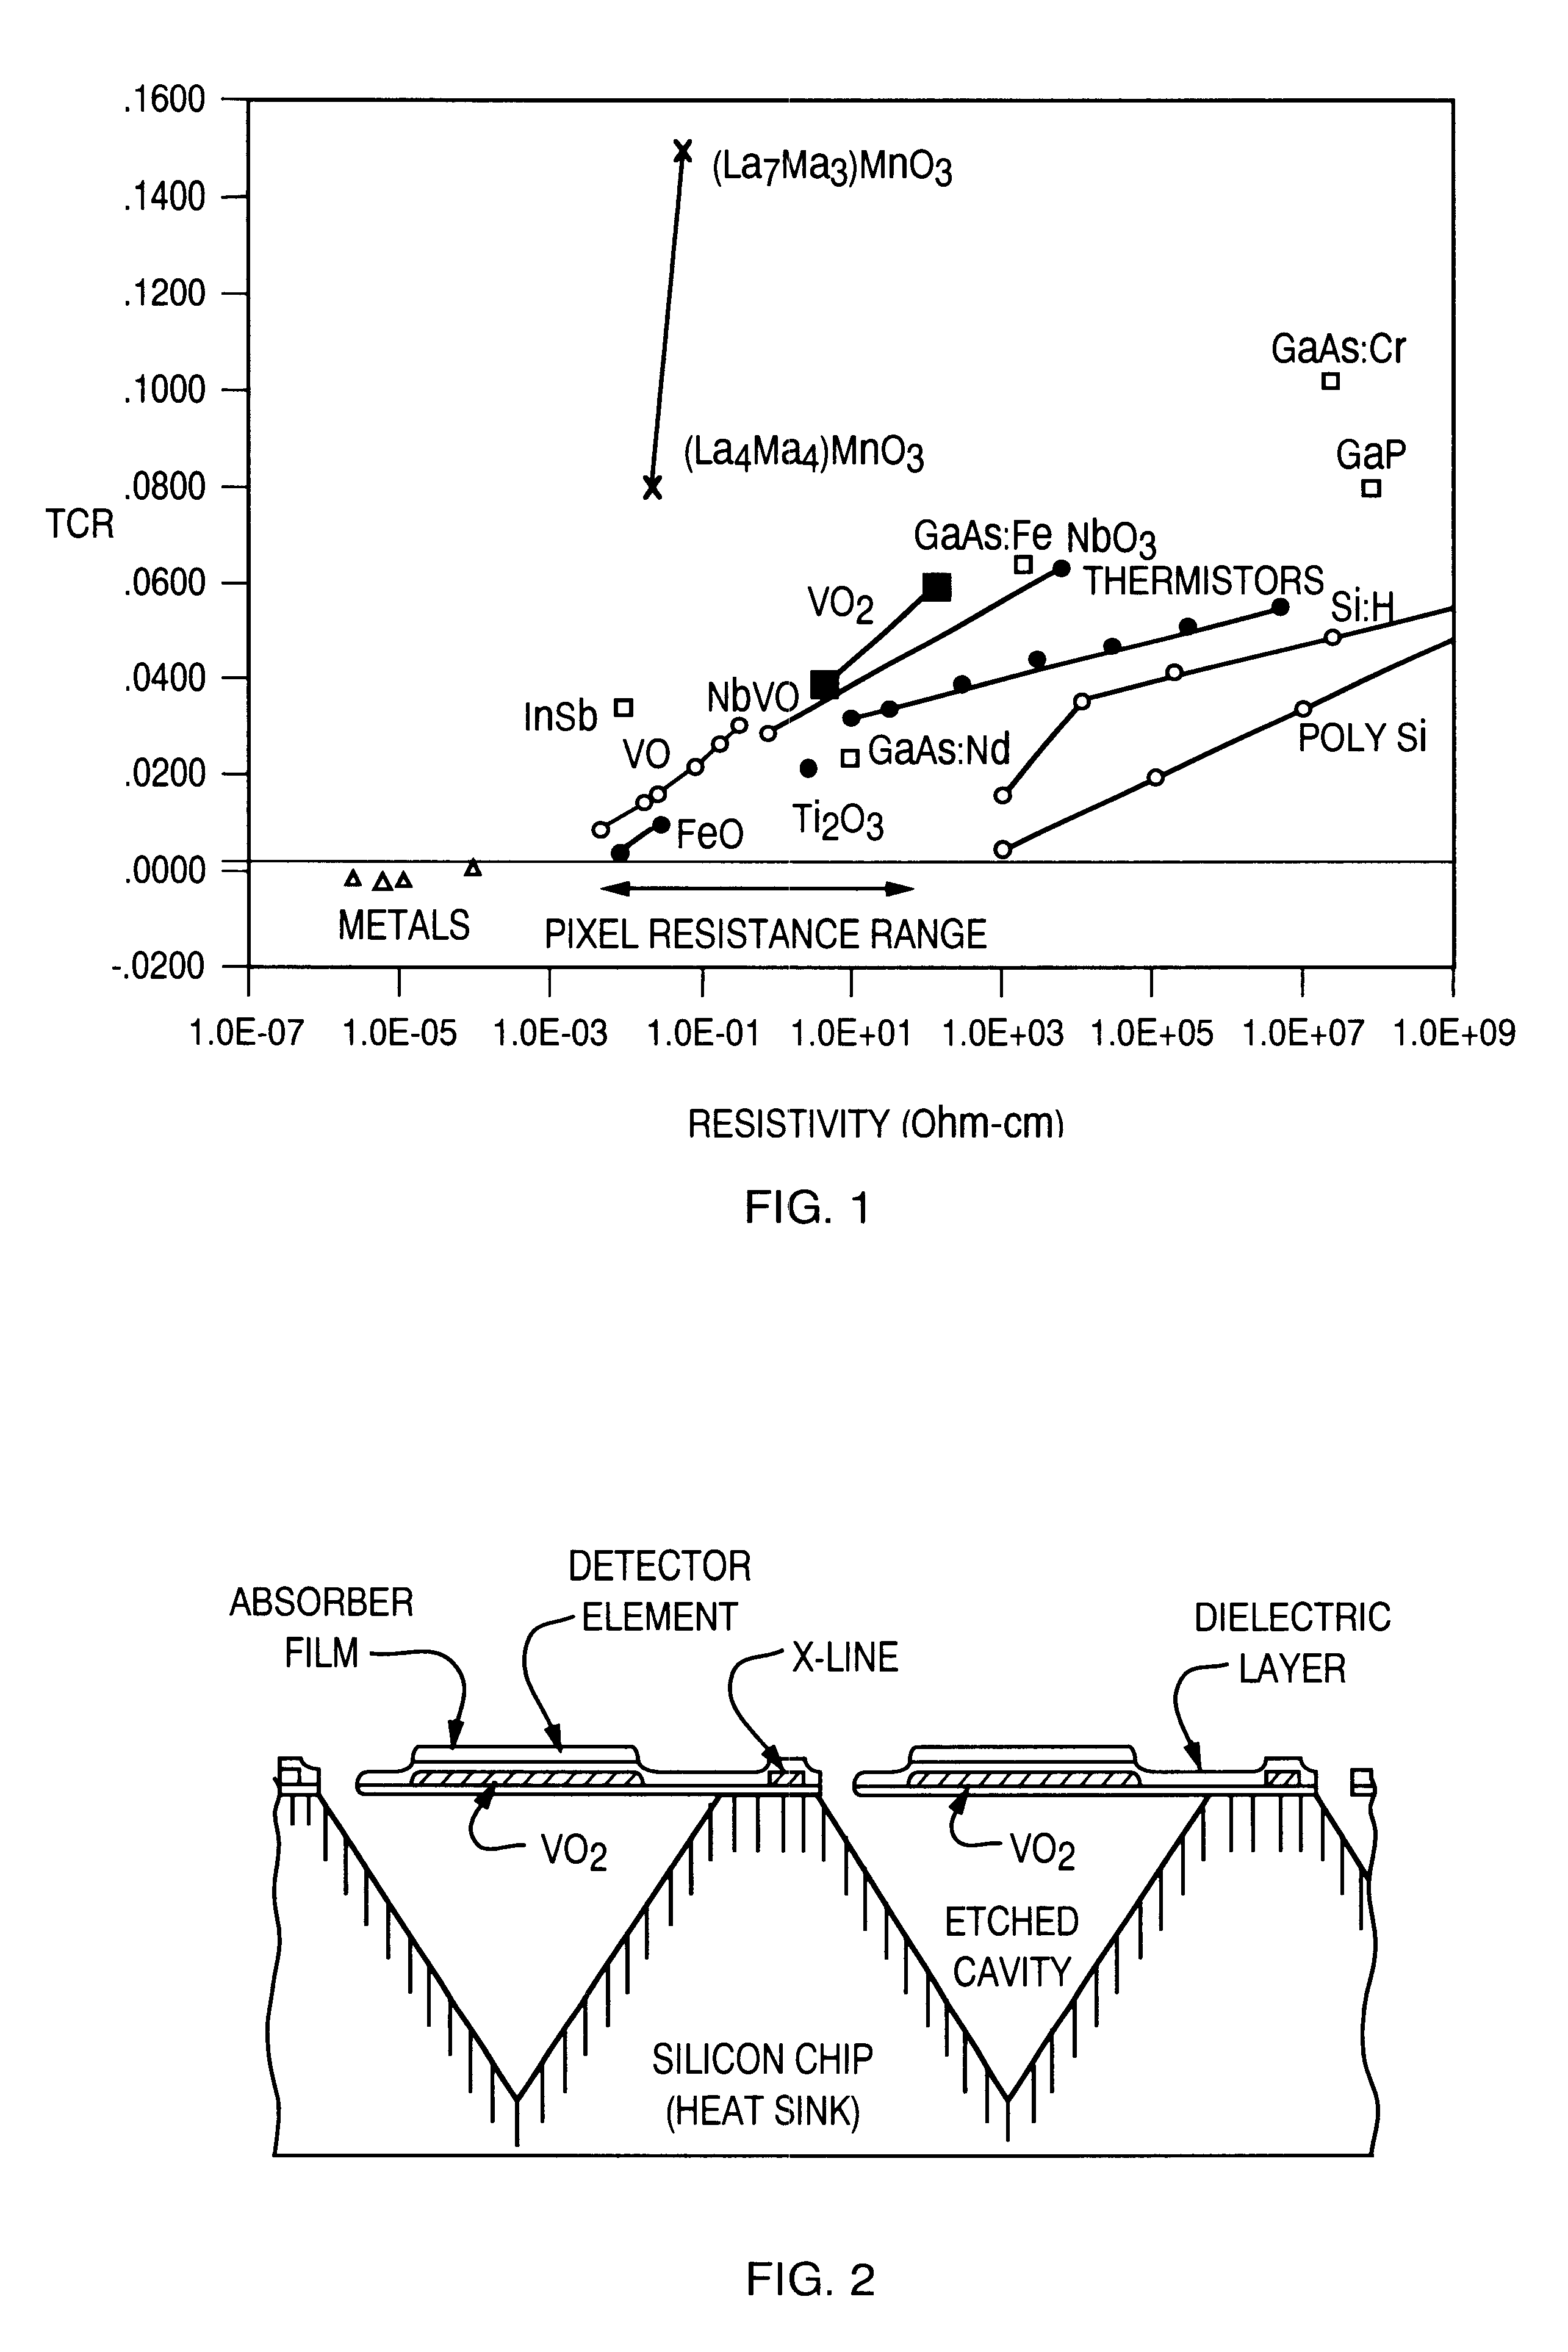 Large temperature coefficient of resistance material